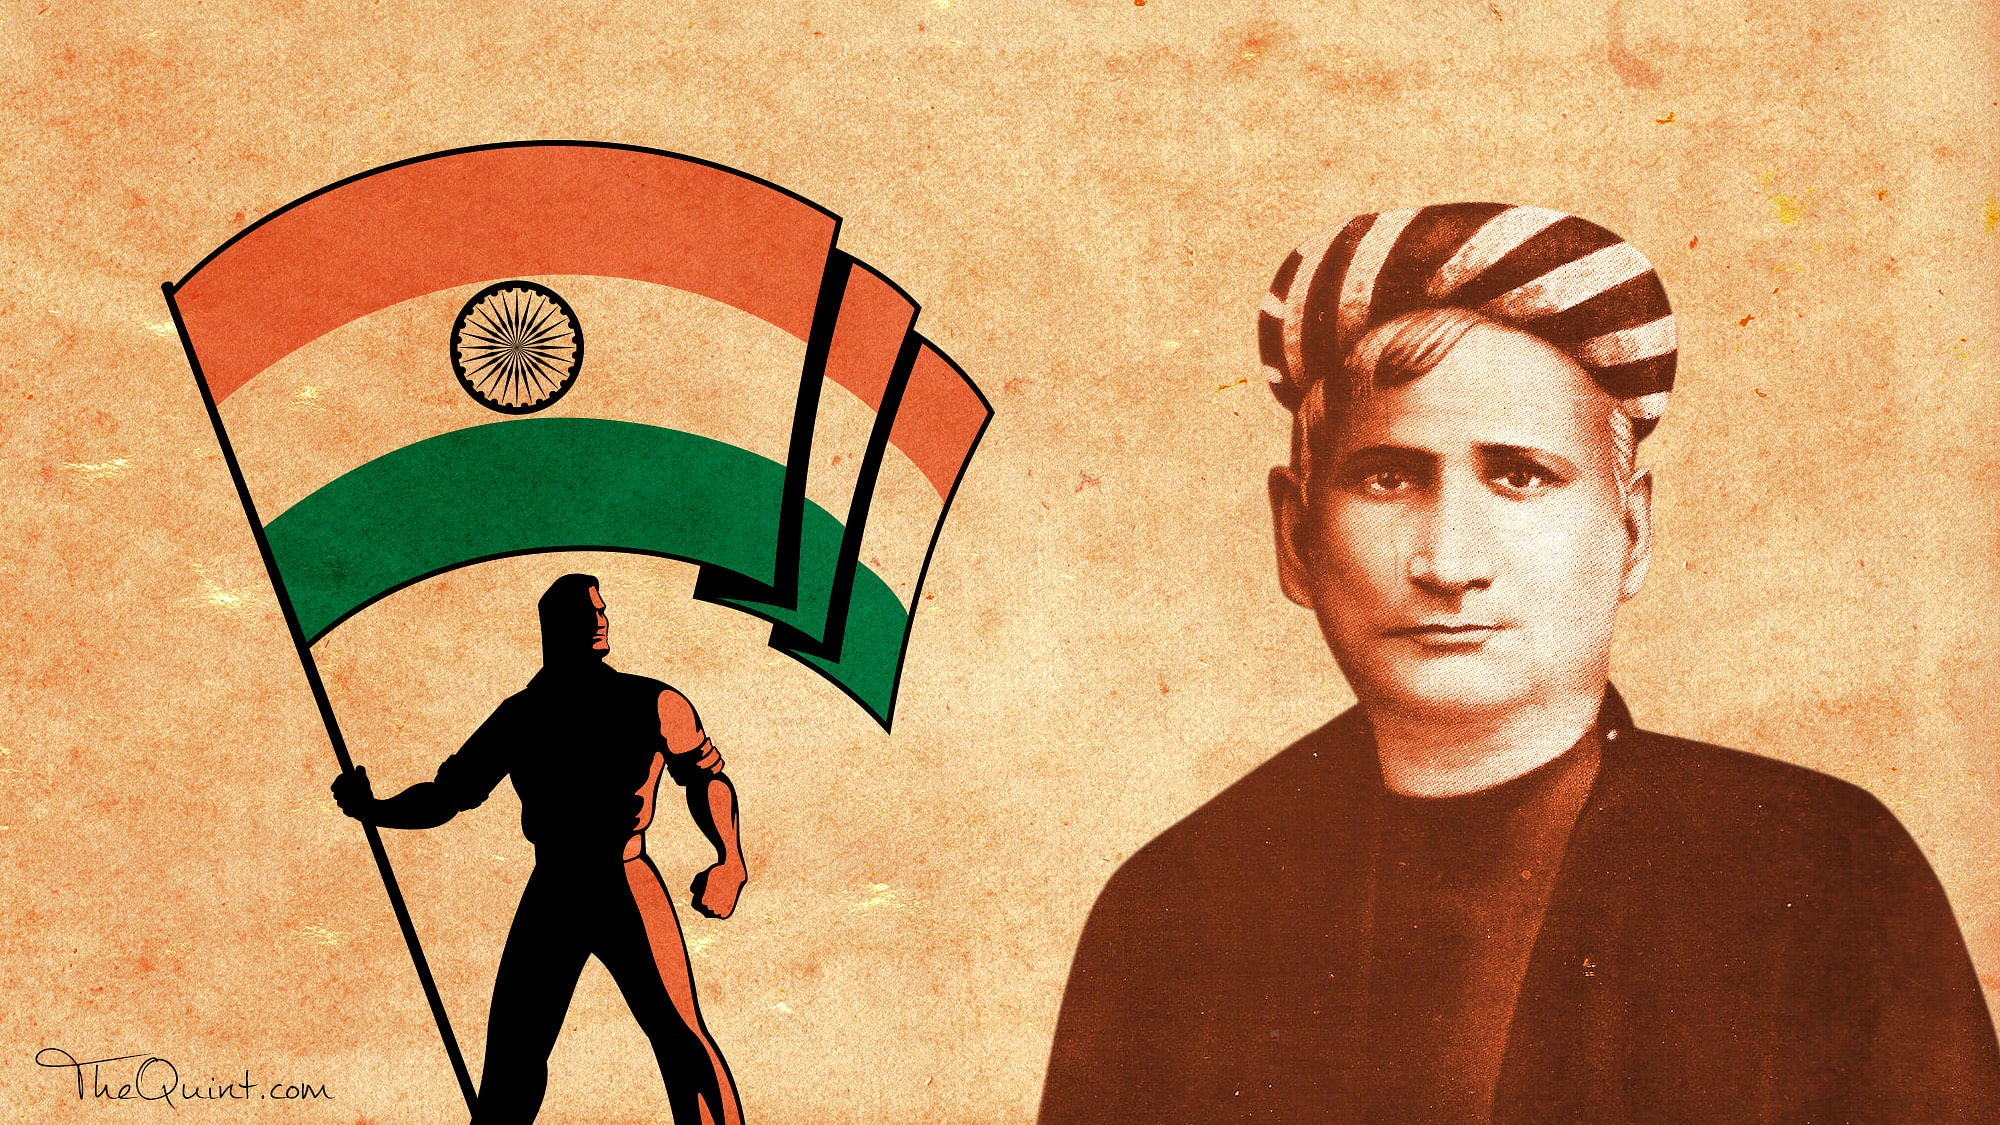 It’s unfortunate that Bankim Chandra’s iconic composition has emerged as a tool of divisive politics lately. 